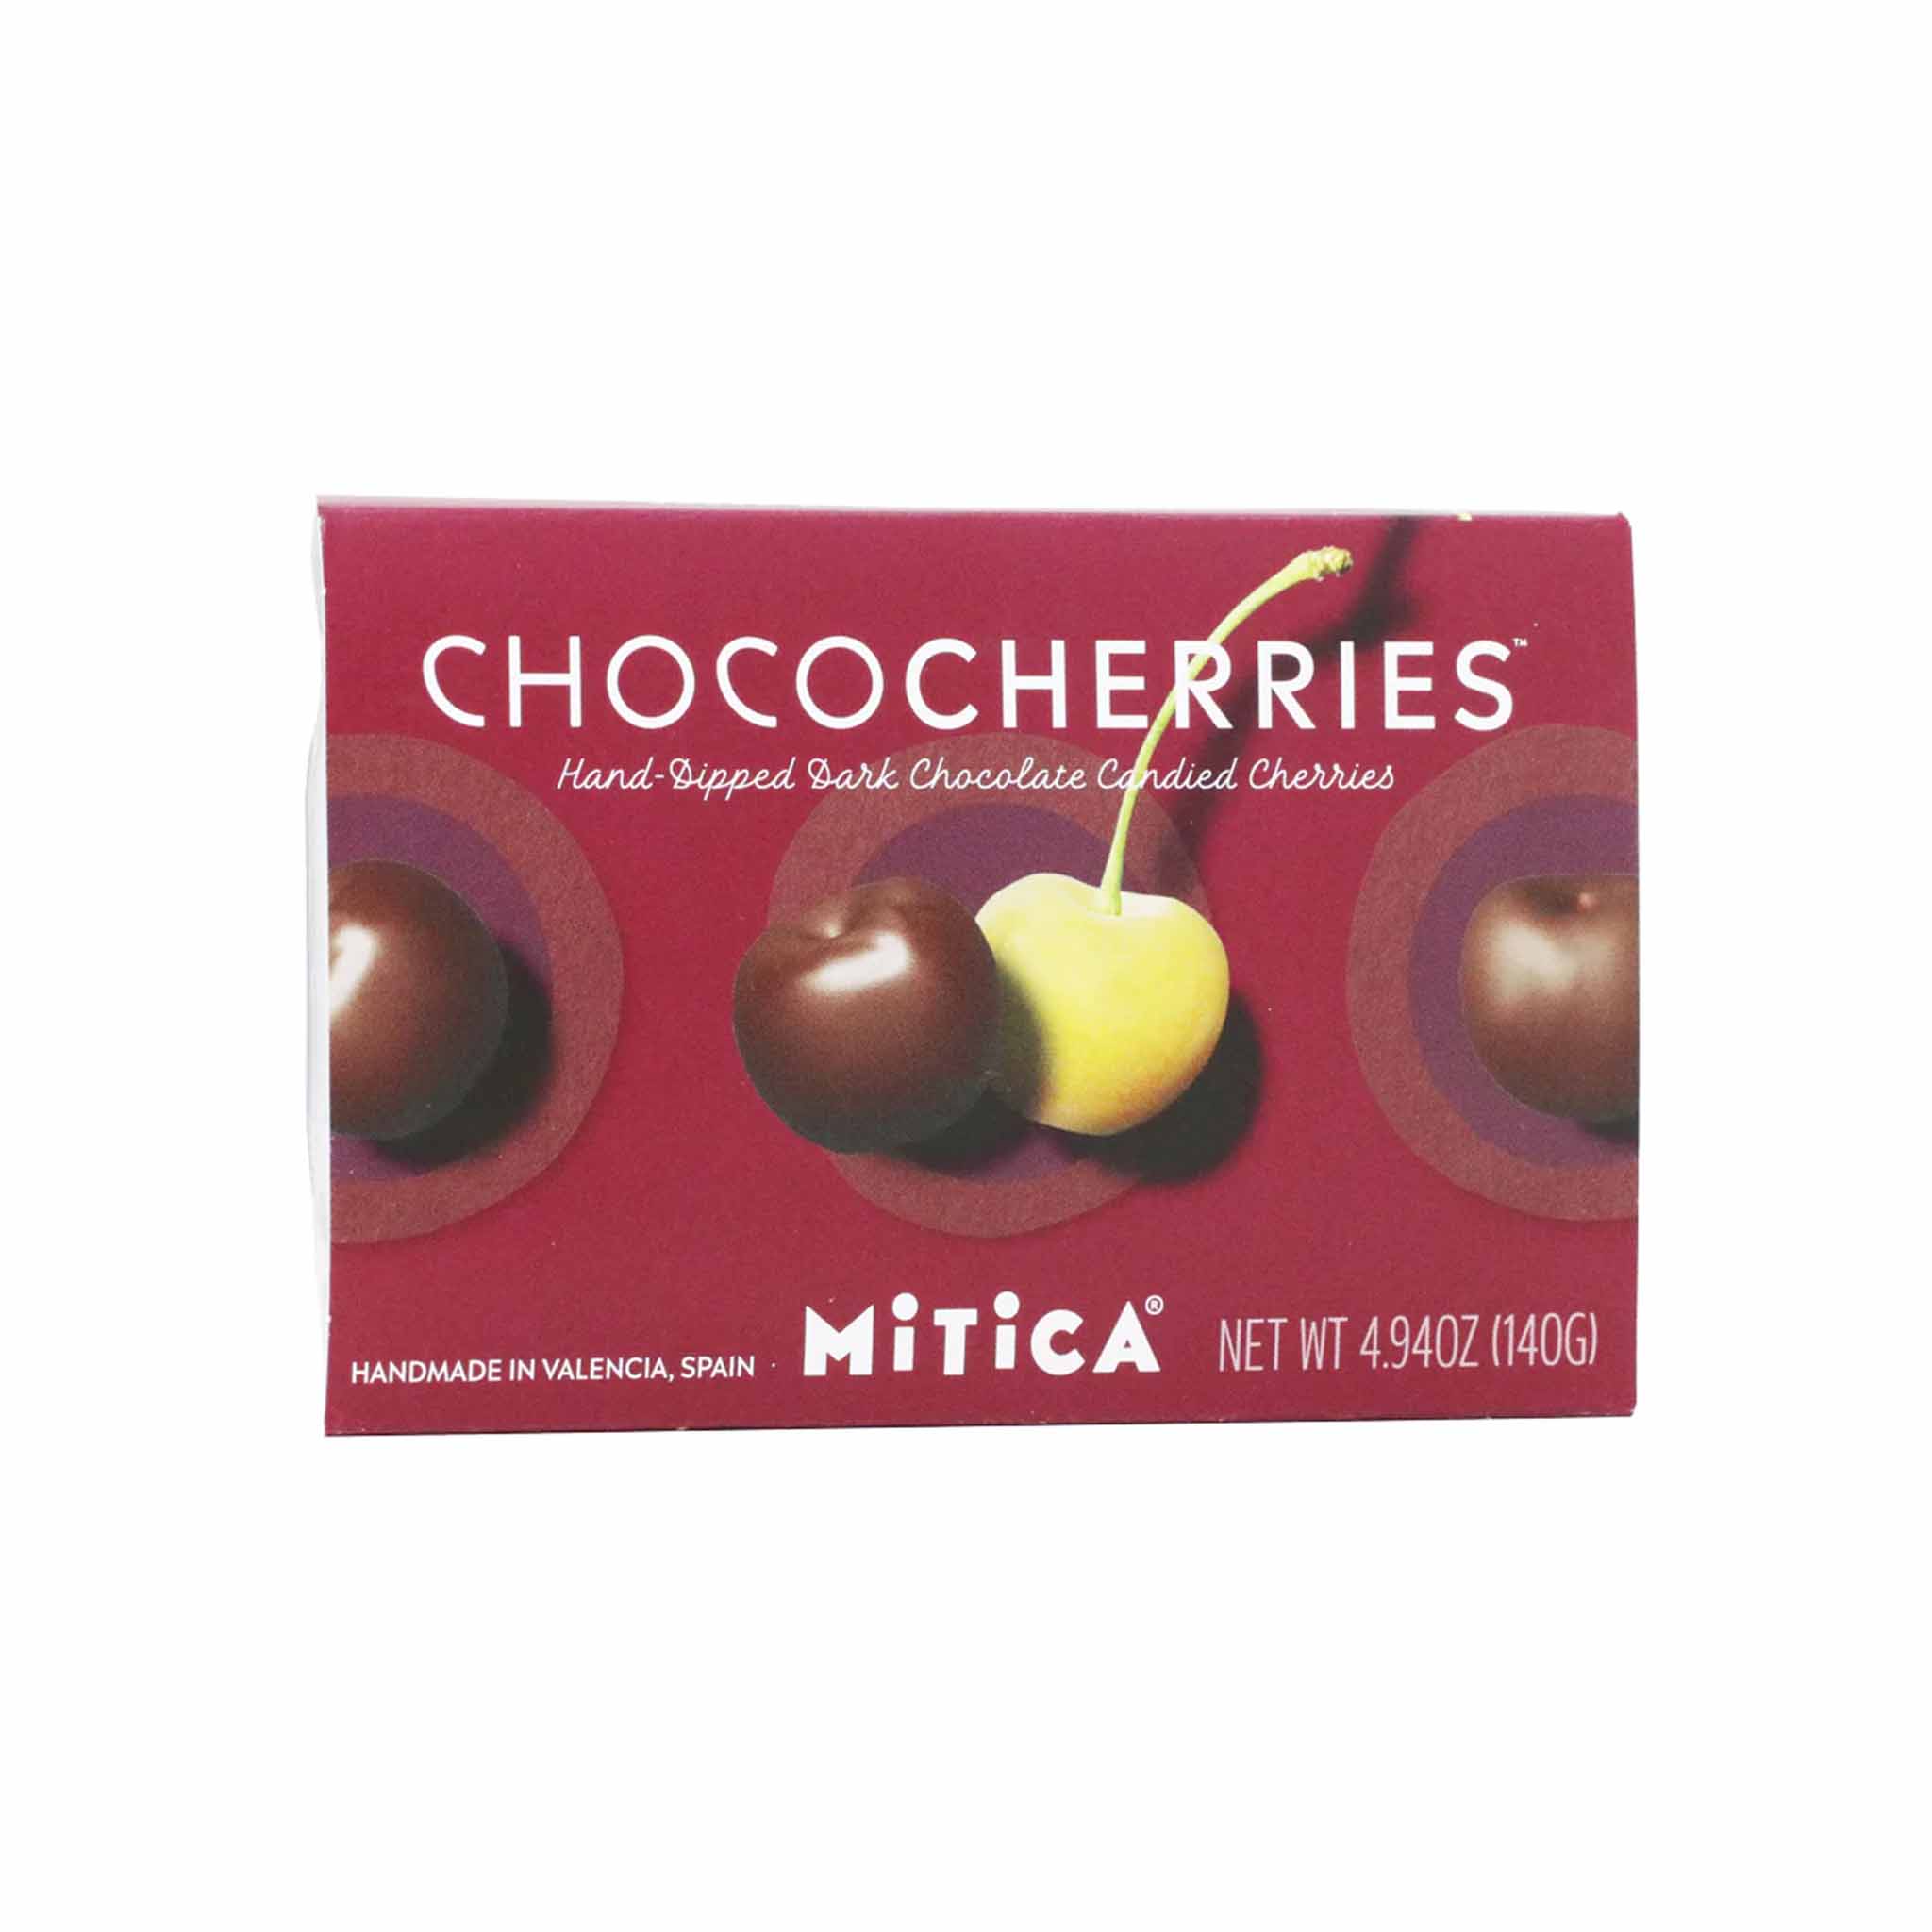 MITICA CHERRIES WRAPPED IN LIQUEUR INFUSED DARK CHOCOLATE 4.94oz